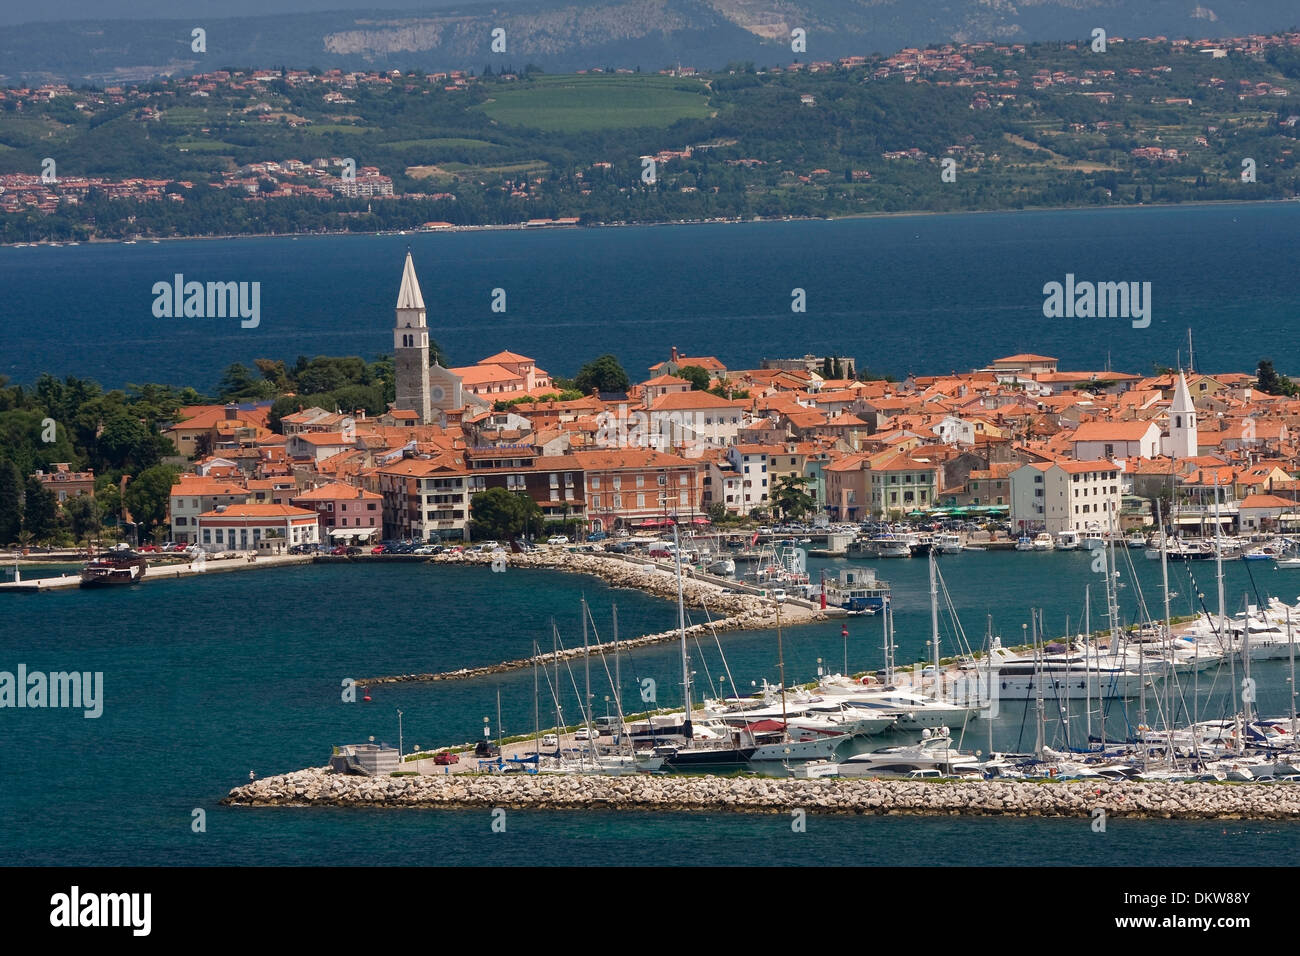 Adriatic Old Town anchor outside Balkan boats Europe Izola marina sail boats Slovenia town city town view yachts yacht harbour Stock Photo